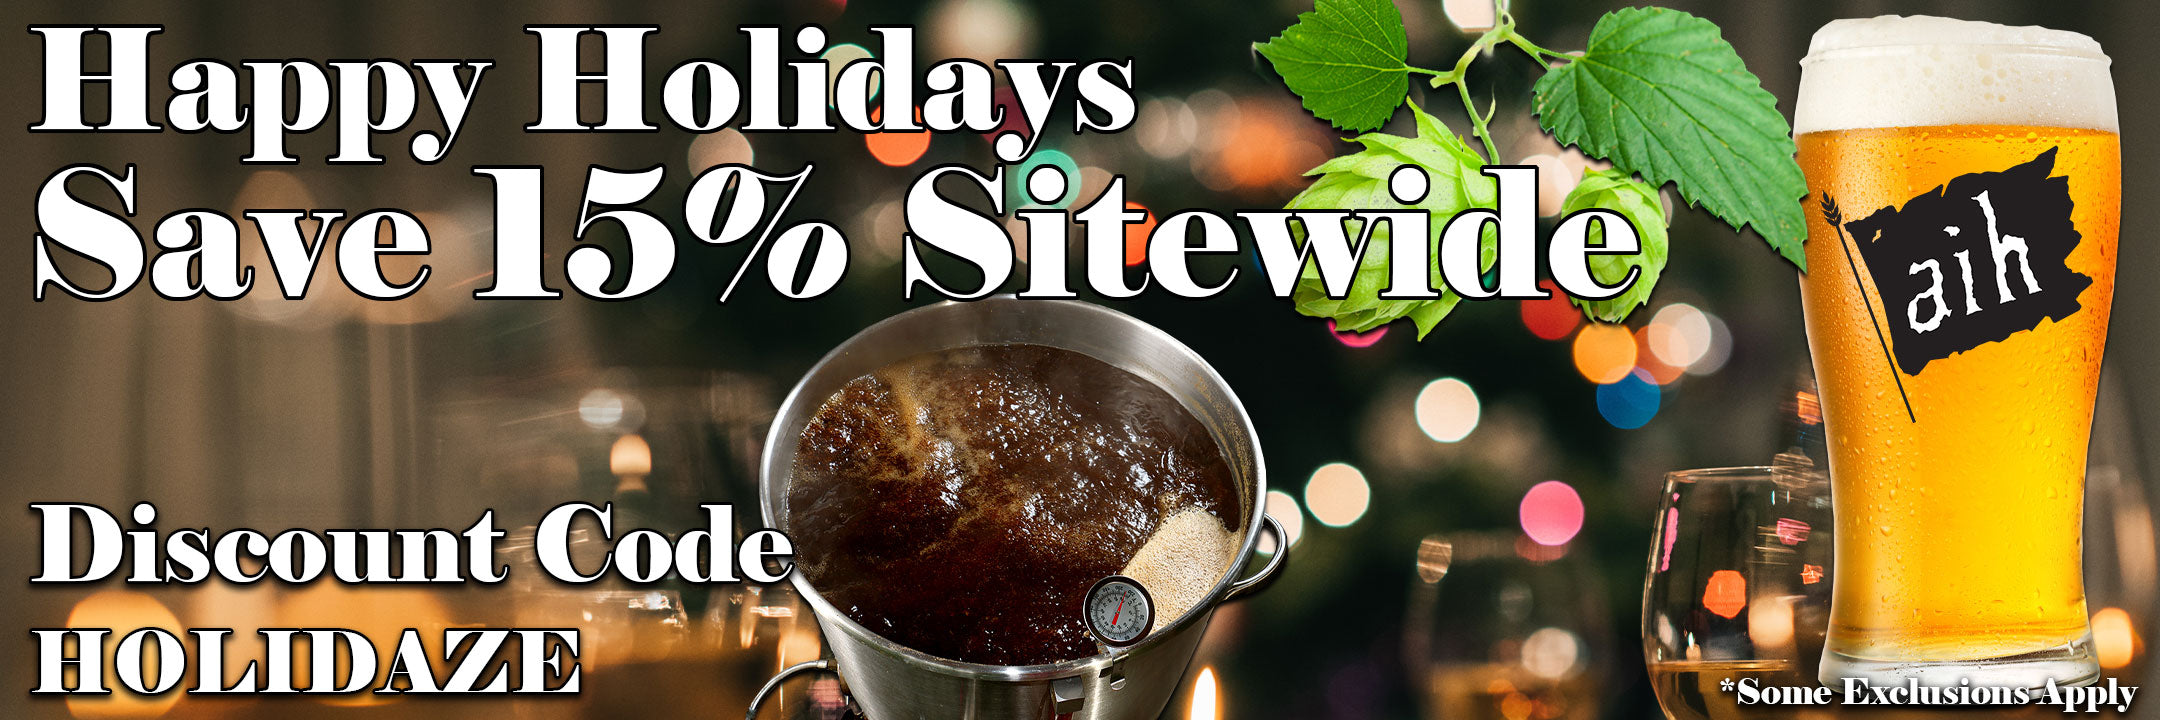 Holiday Sale 15% Off Sitewide 